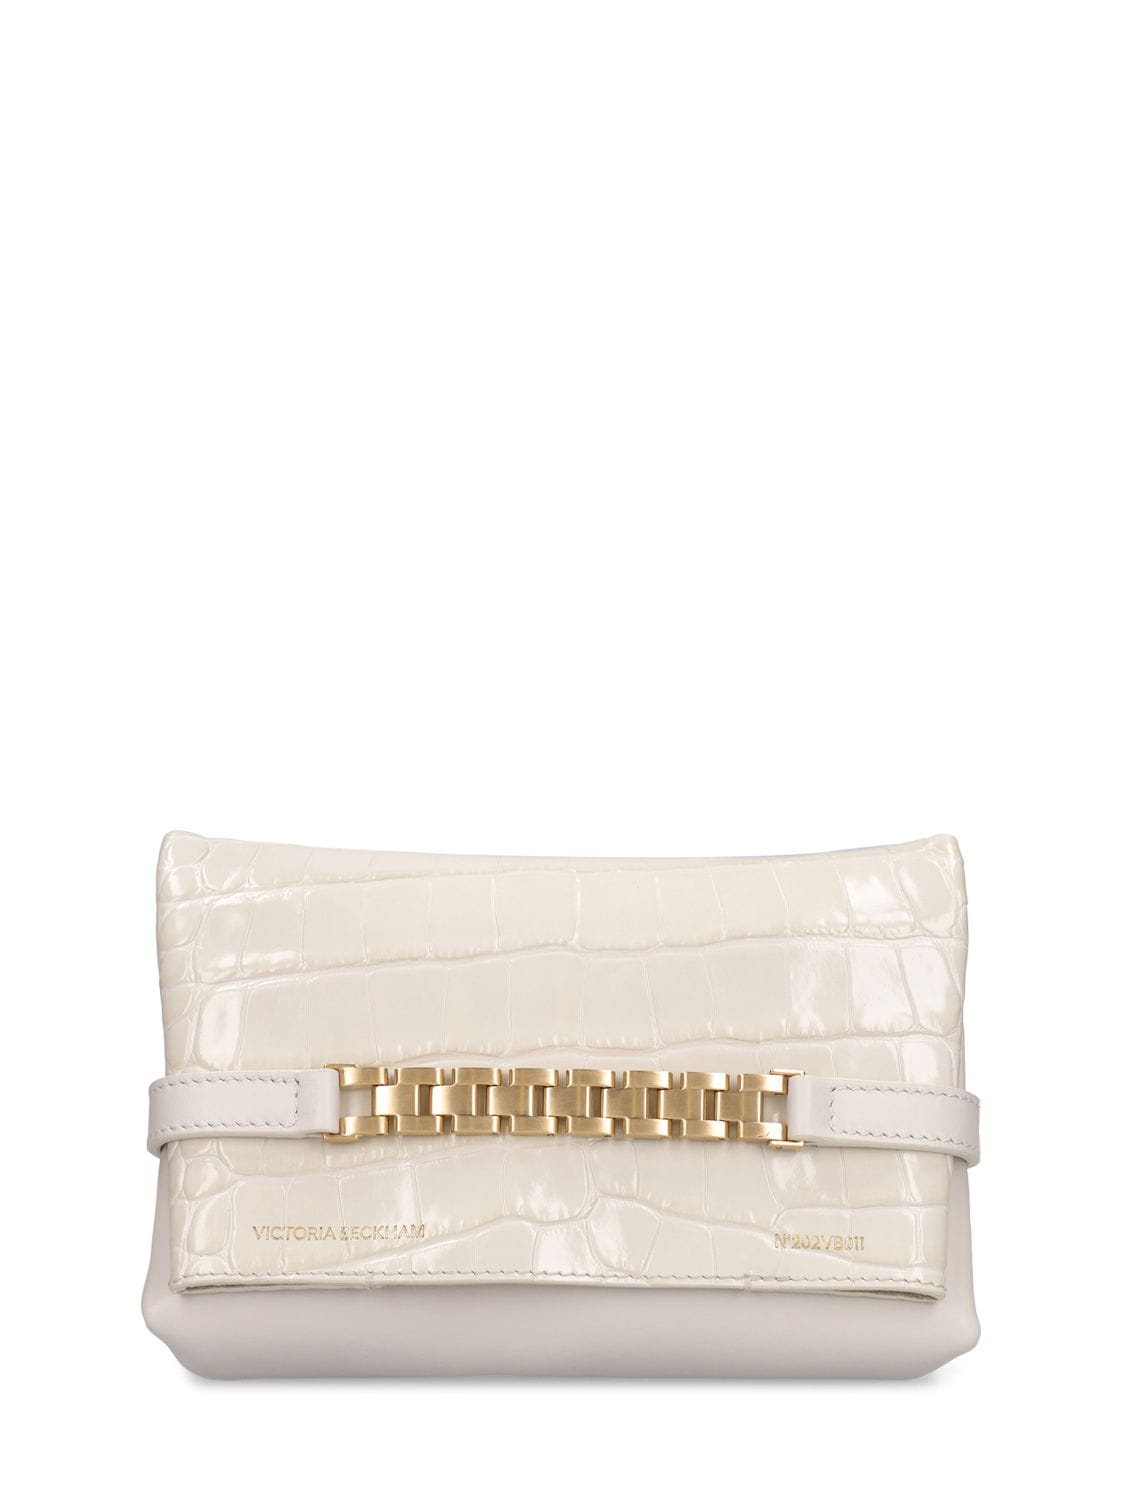 Victoria Beckham Lvr Exclusive Croc Embossed Chain Pouch In Ivory